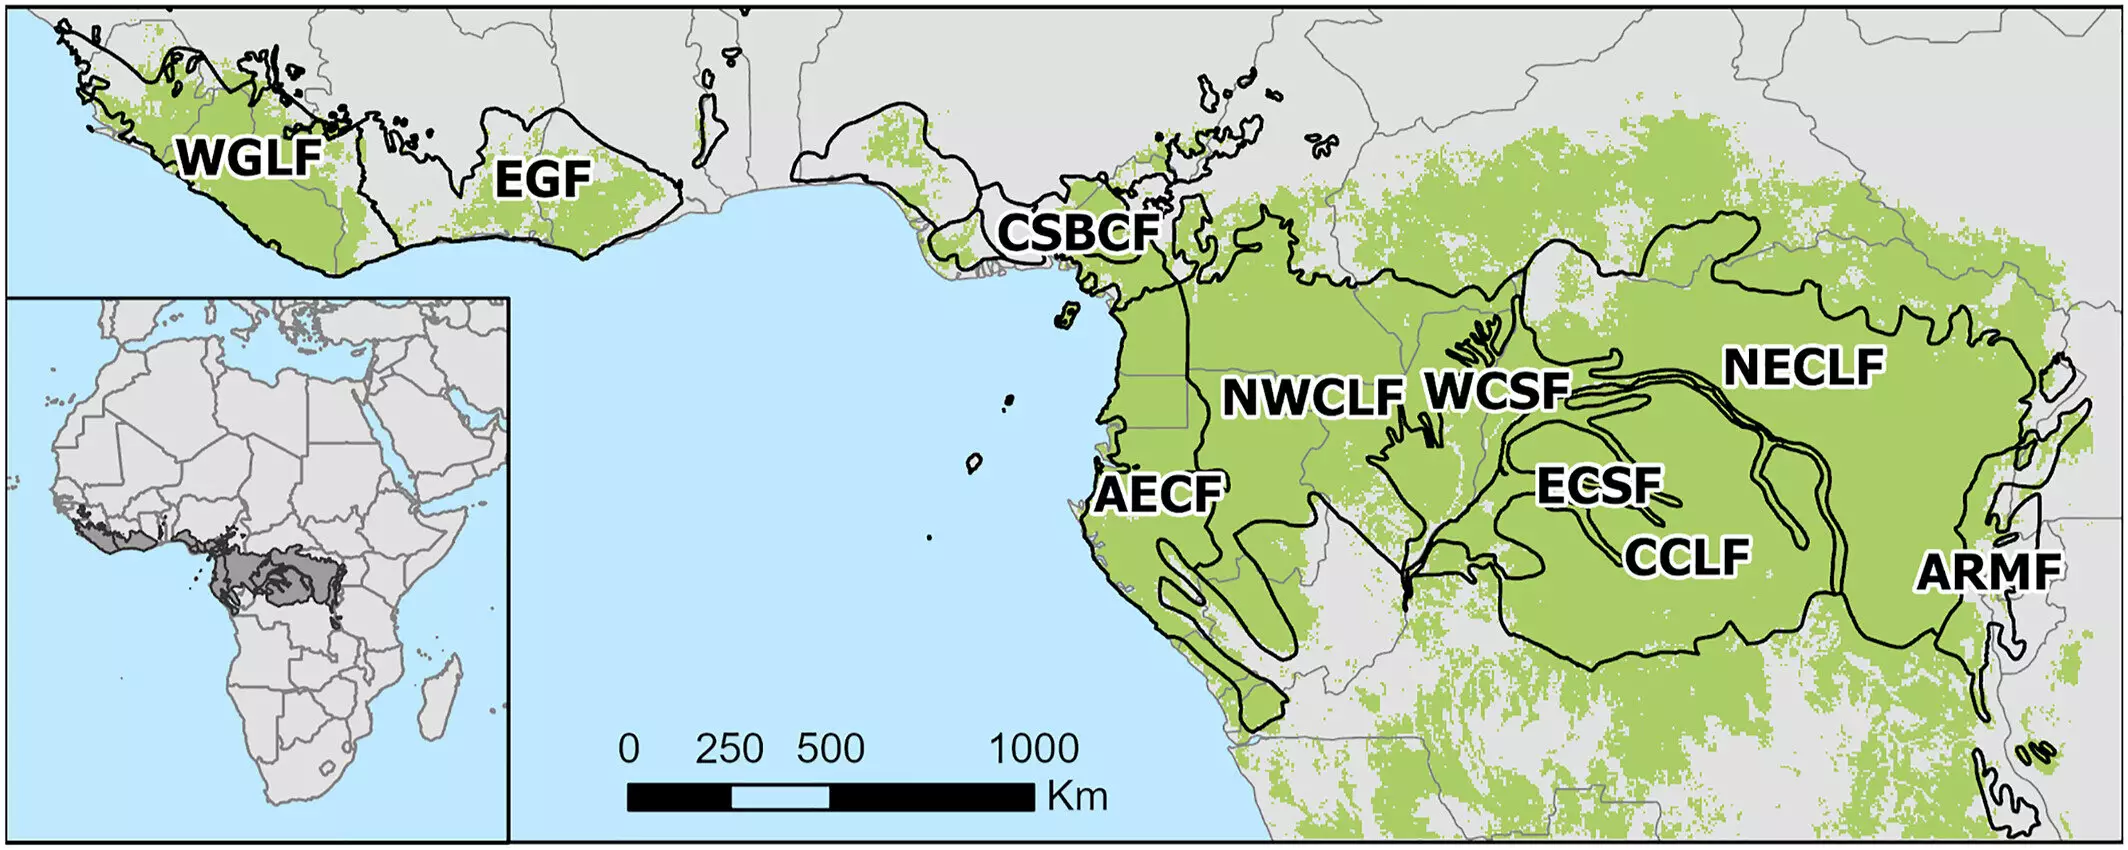 Understanding the Impact of Increasing Forest Fires in Wet, Tropical African Forests